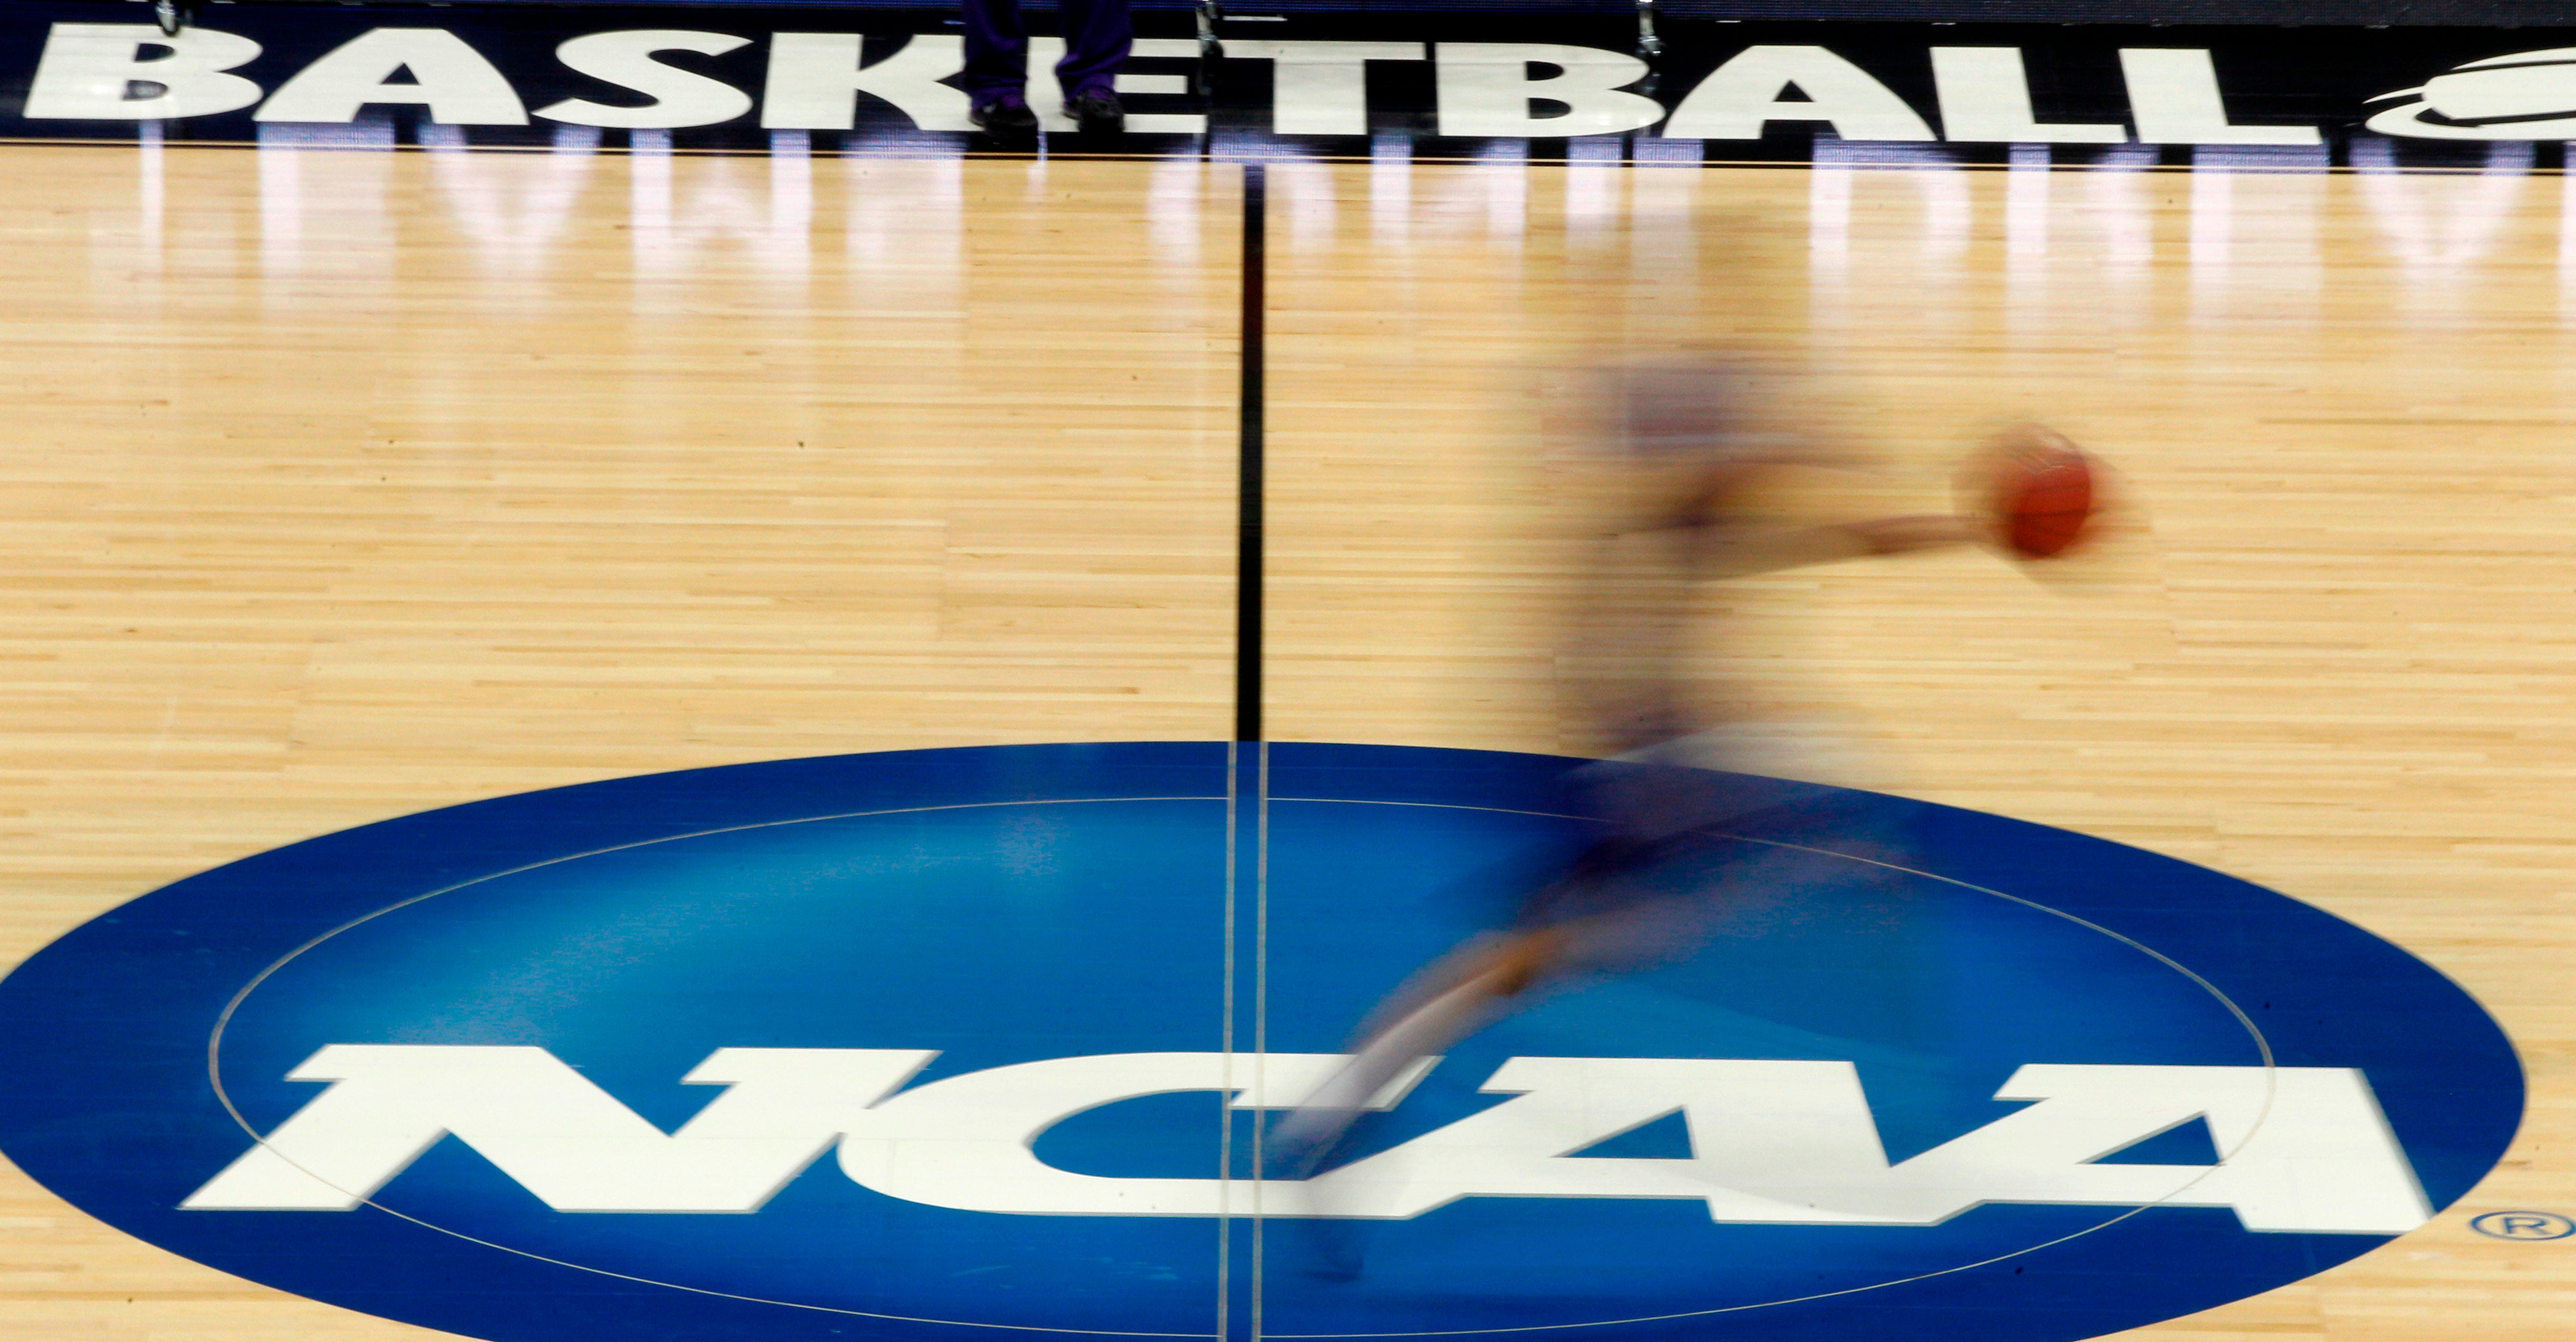 NCAA Supreme Court ruling: What it means for college sports, athletes